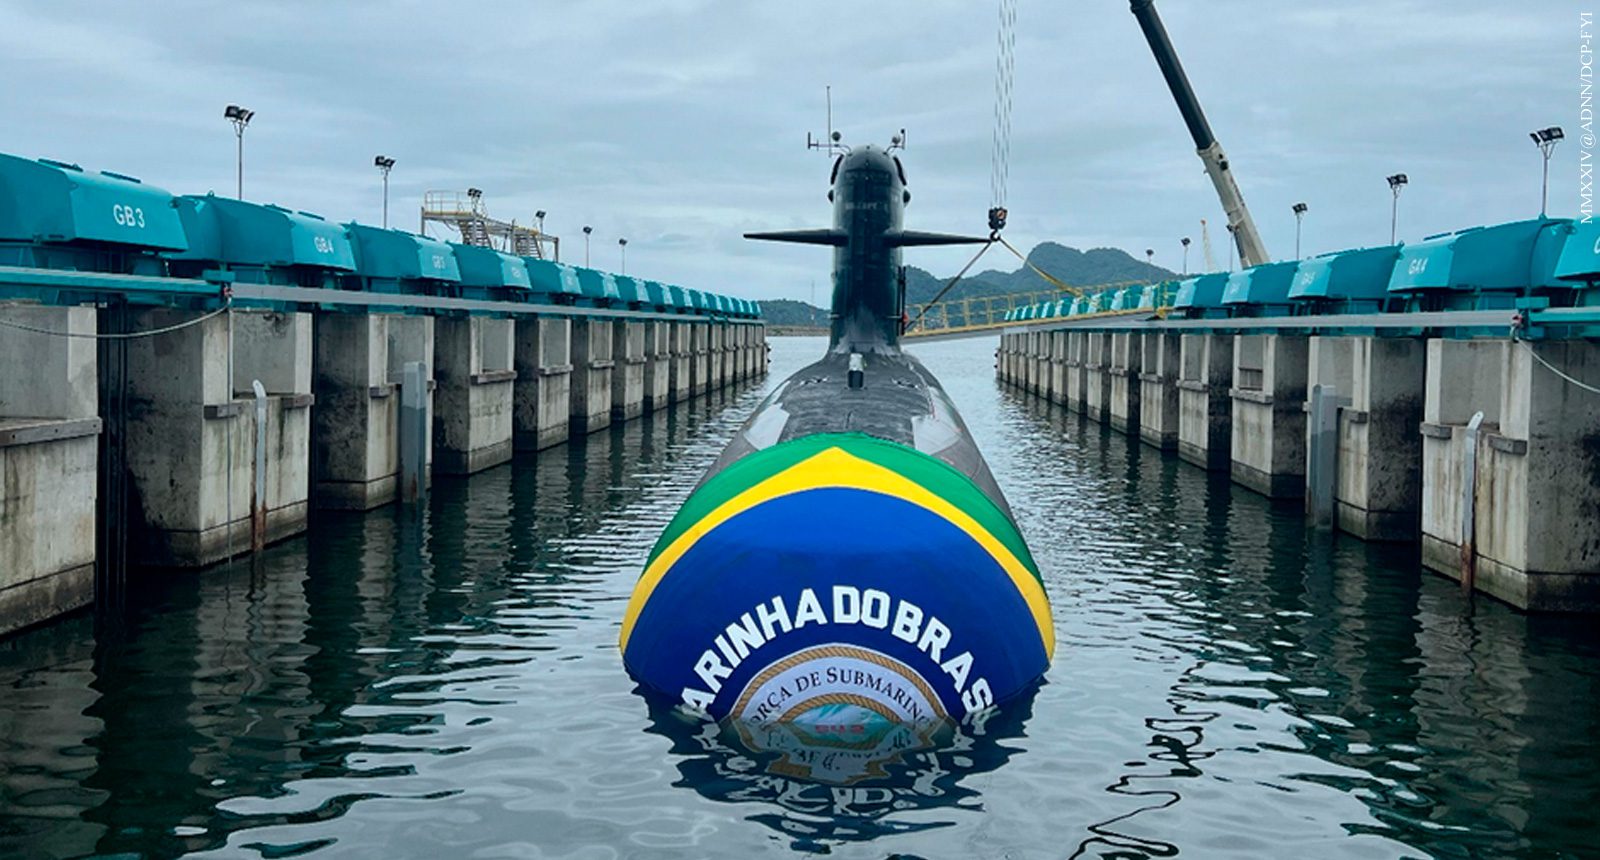 As a result of the transfer of technology provided by PROSUB, Brazil will be in the select group of countries that have the capacity to design, build, operate and maintain their own conventional and nuclear-powered submarines